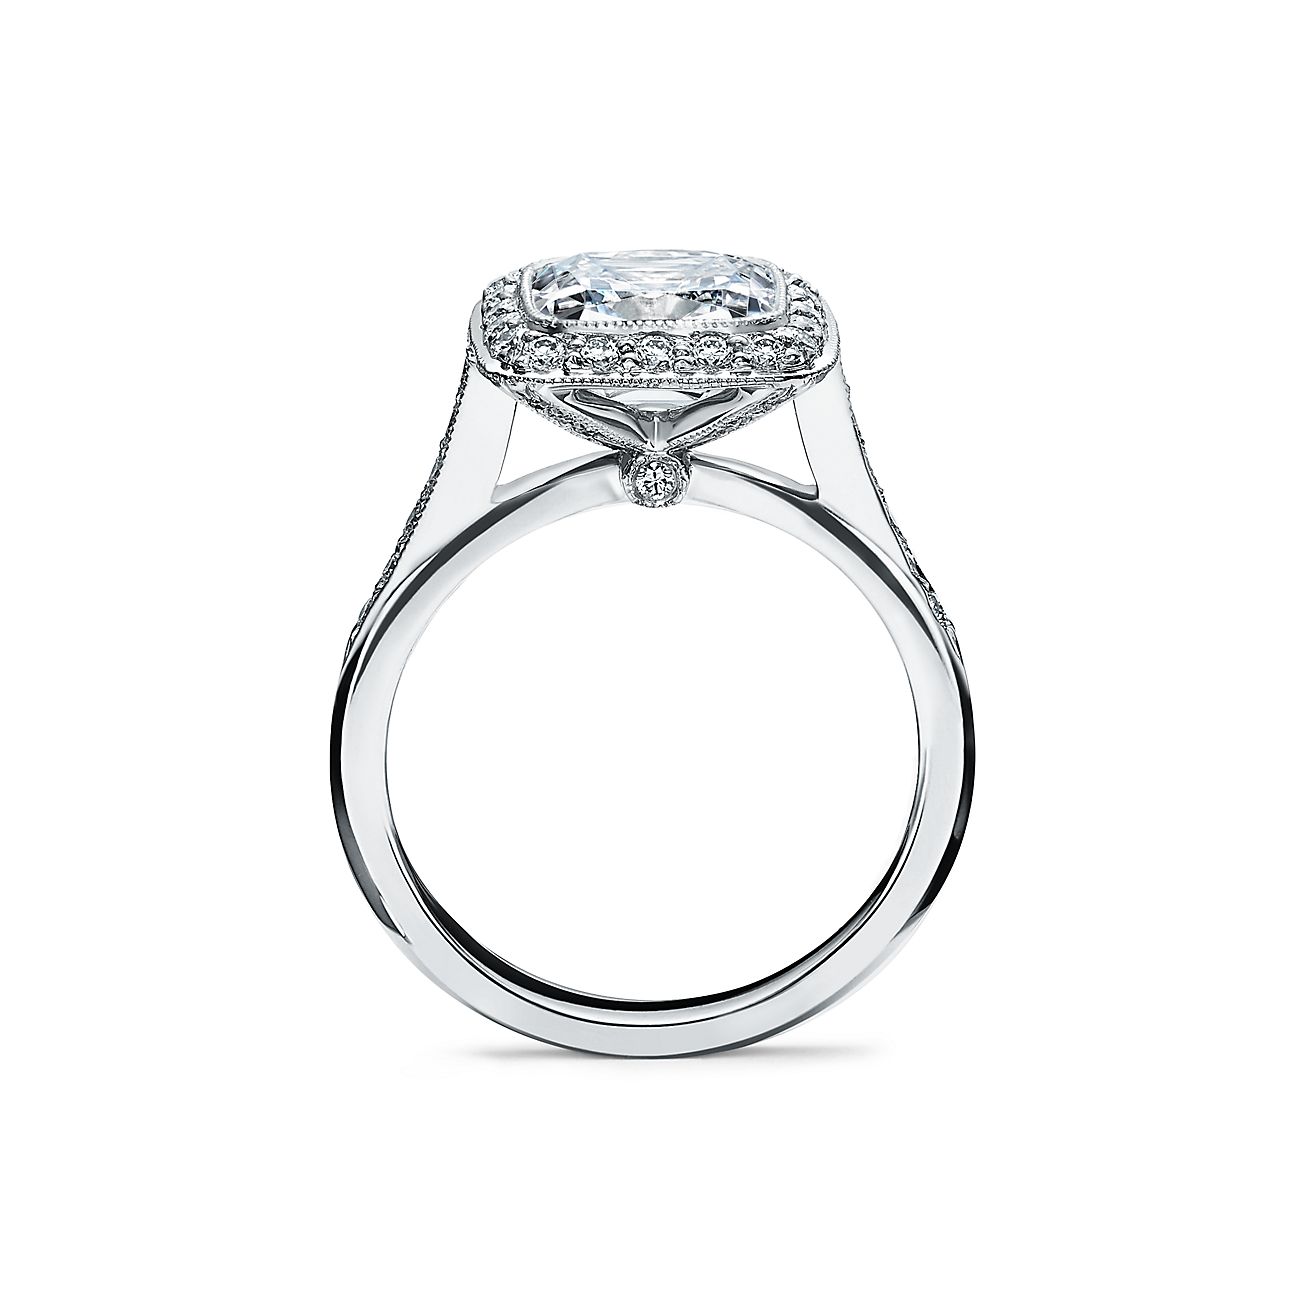 Tiffany Legacy™ Engagement Ring with a 